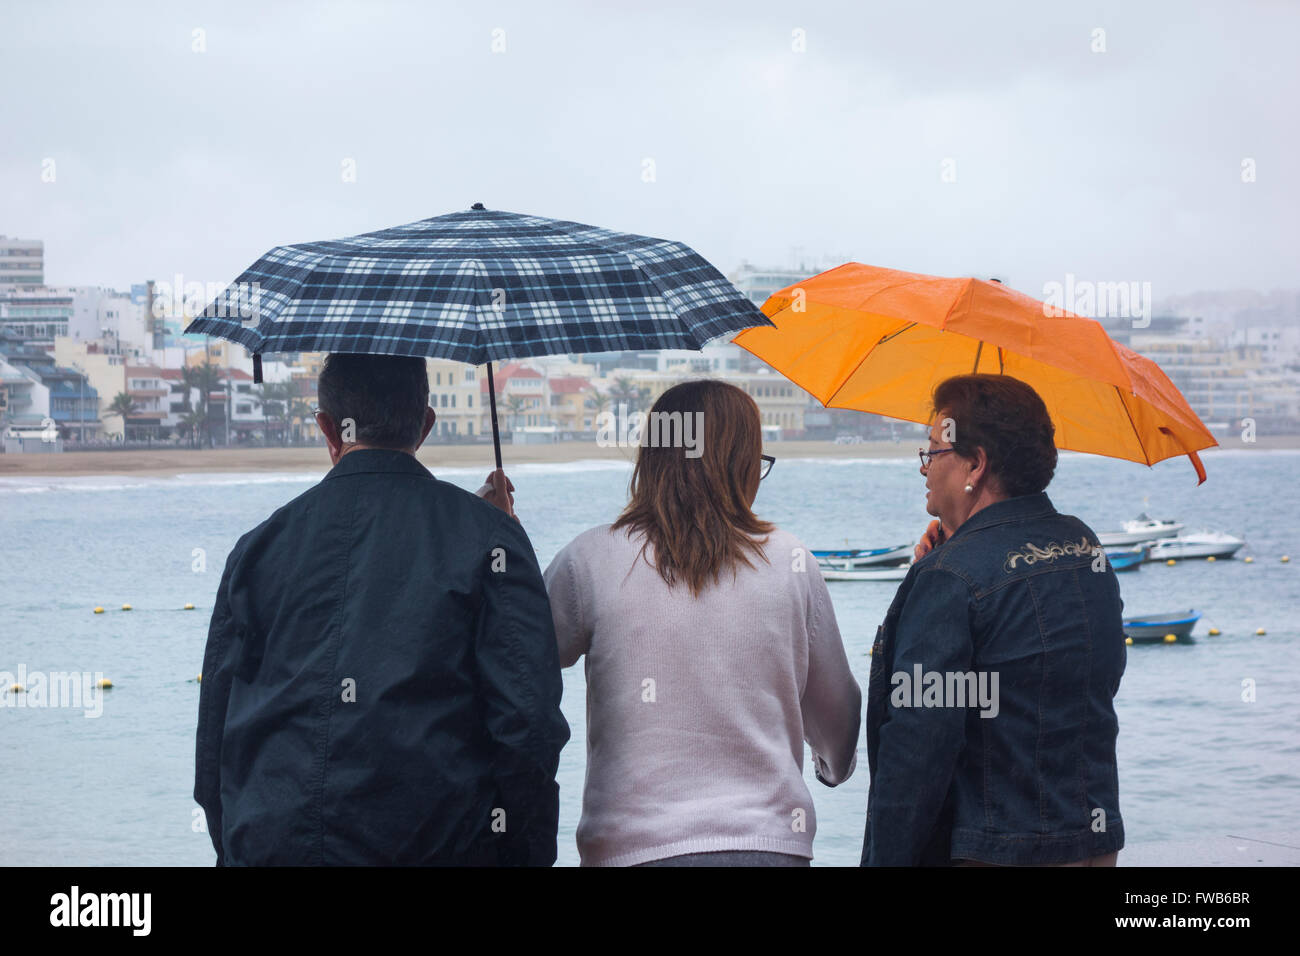 Las Palmas, Gran Canaria, Canary Islands, Spain, 3rd April 2016. Weather: With much of the UK forecast to have warm sunshine on Sunday and UK press saying 'hotter than Spain...', it`s a wet Sunday morning in Las Palmas on Gran Canaria as a band of rain sweeps over the city beach. PICTURED: People looking out over an empty Las Canteras beach in Las Palmas as rain comes down on a grey Sunday morning on Gran Canaria. Credit:  Alan Dawson News/Alamy Live News Stock Photo